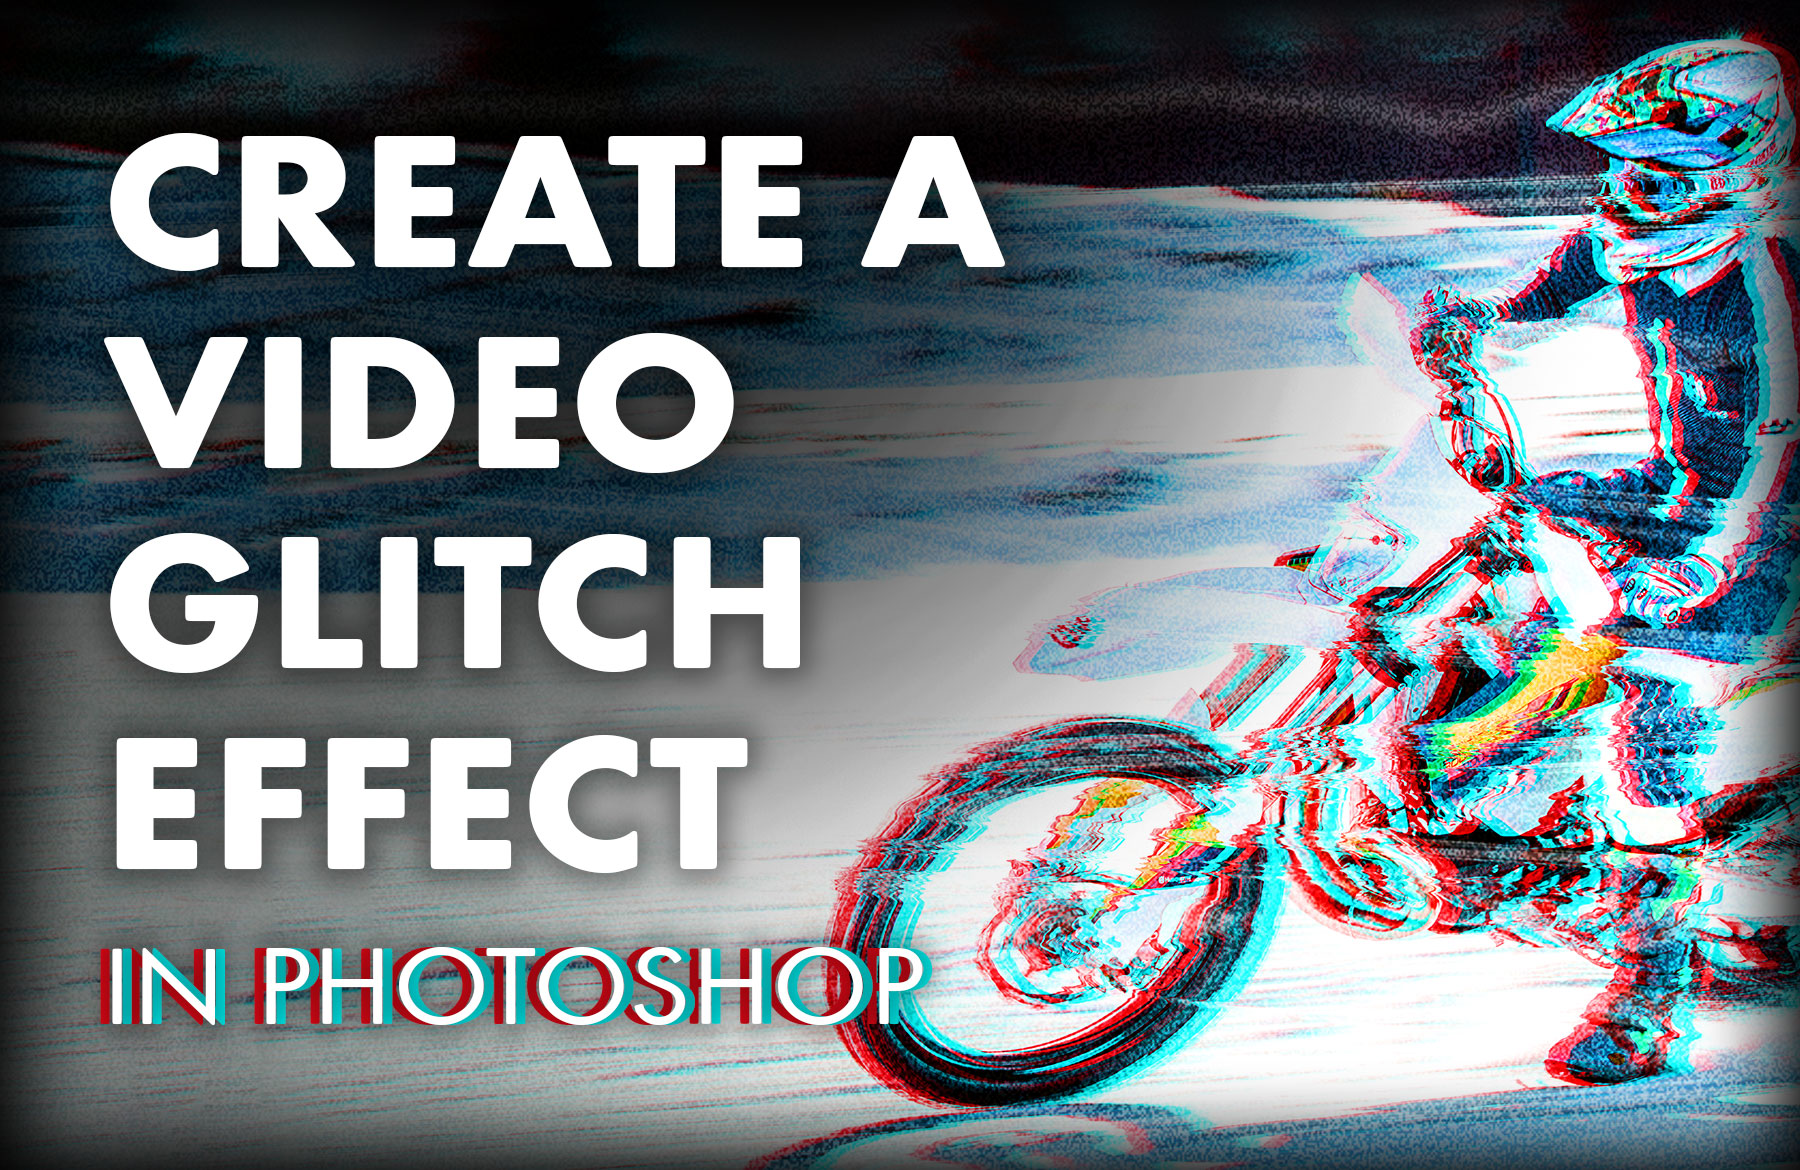 How to add glitch effect to videos